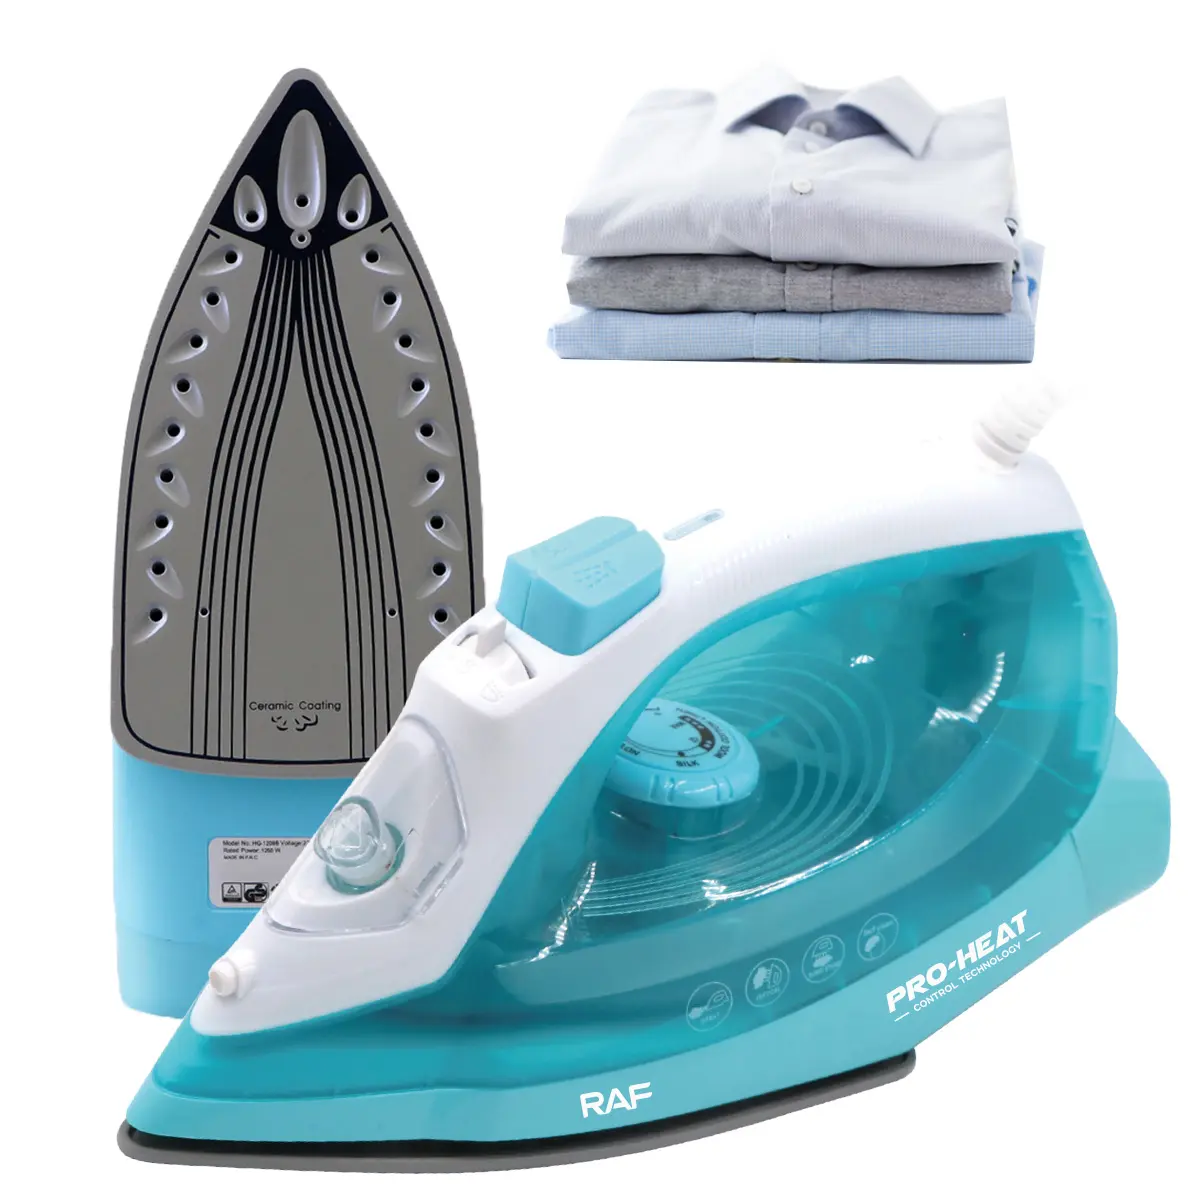 Wholesale National Professional Electric Iron Steamer Electric Steam Iron For Clothes